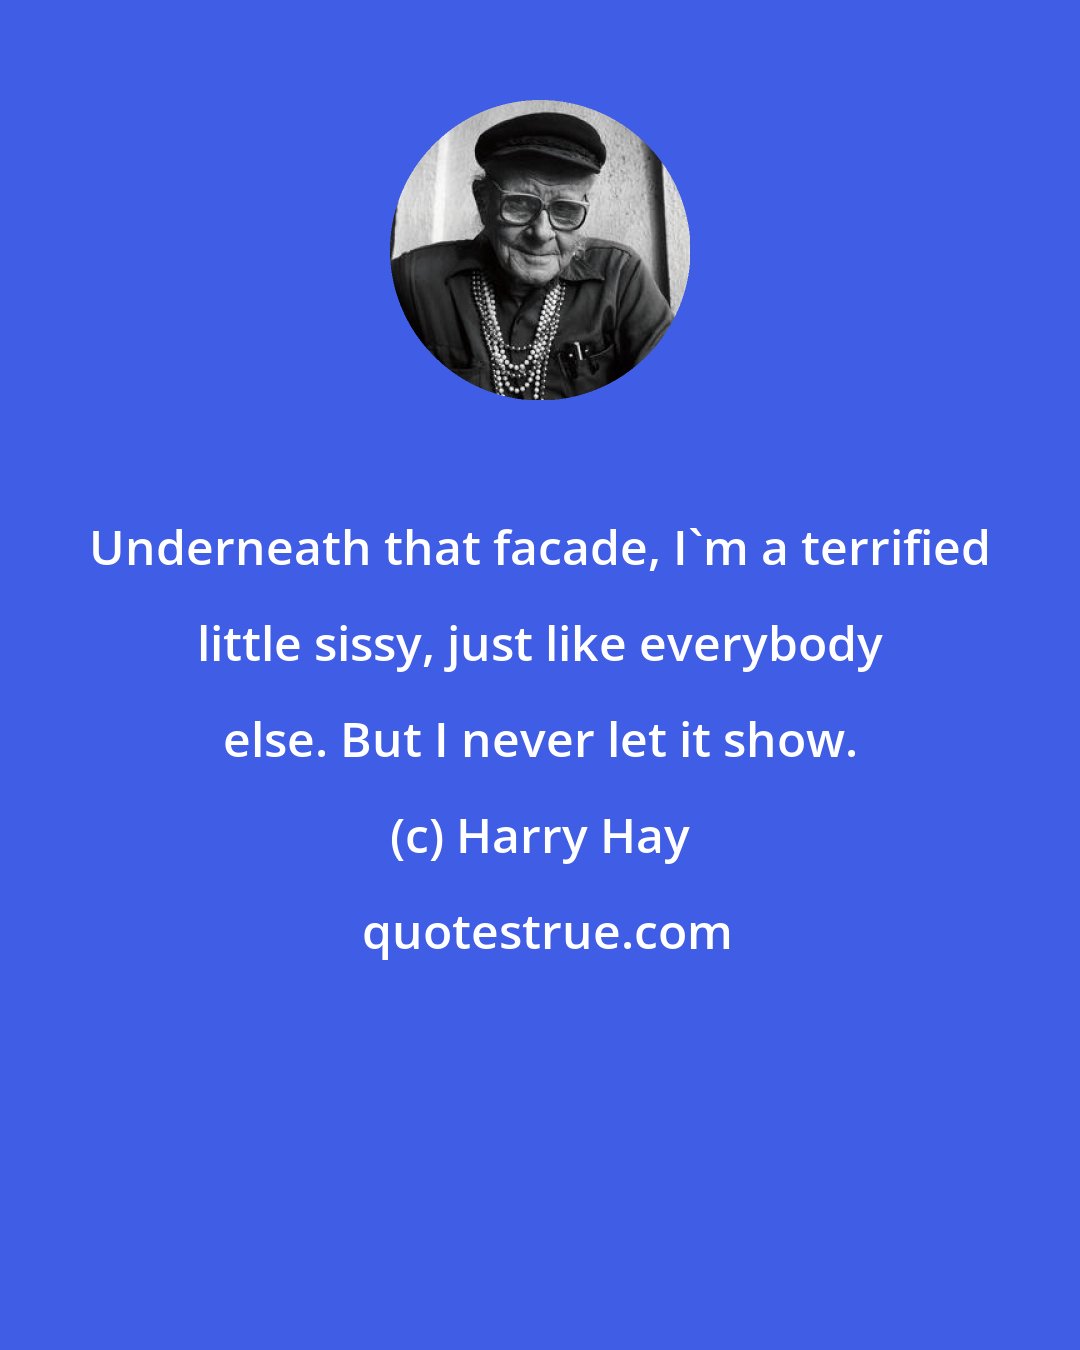 Harry Hay: Underneath that facade, I'm a terrified little sissy, just like everybody else. But I never let it show.